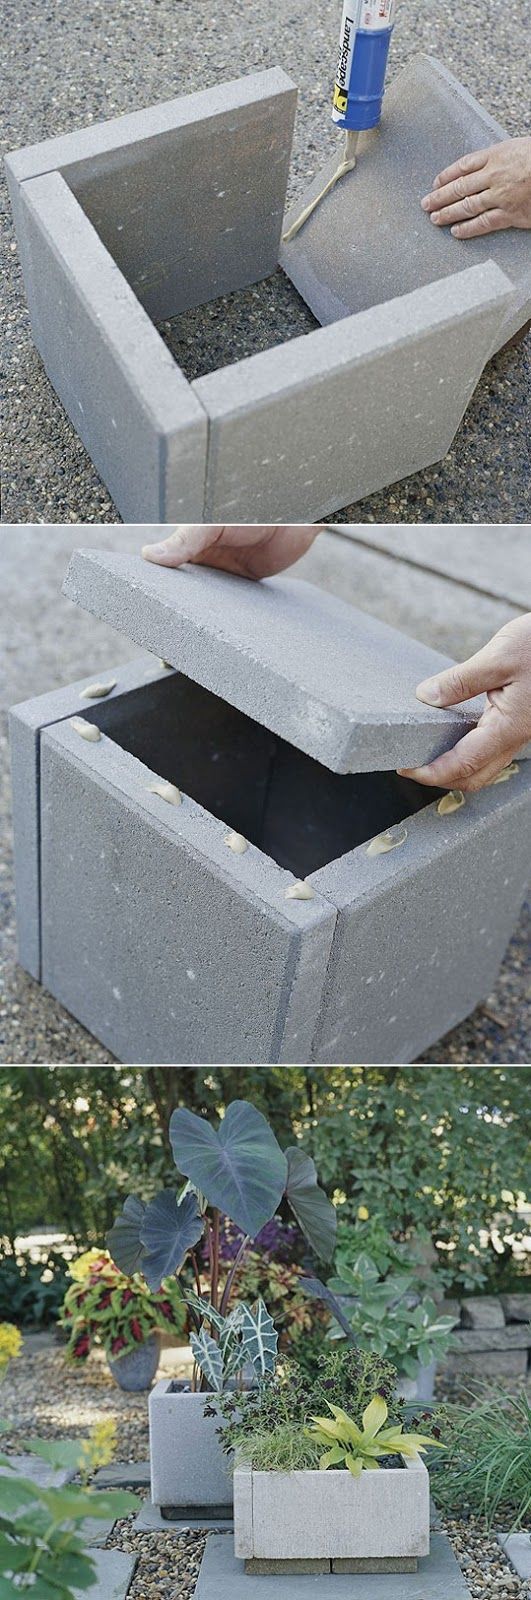 DIY Unique Concrete Projects That Will Beautify Your Garden